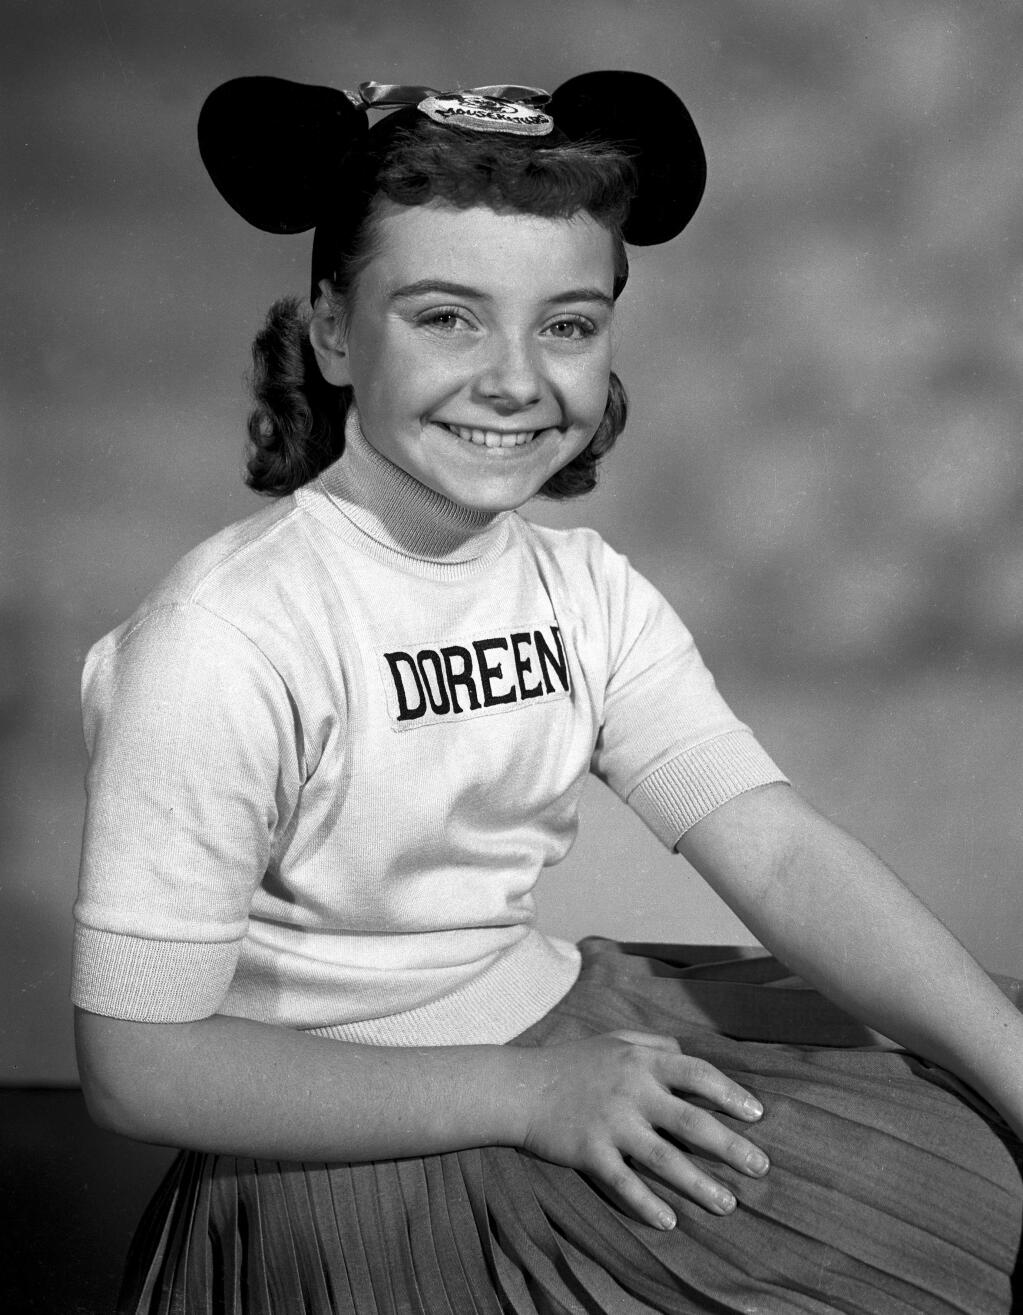 This undated photo released by Disney, shows Disney Mouseketeer Doreen Tracey. Tracey, a former child star who played one of the original cute-as-a-button Mouseketeers on 'The Mickey Mouse Club' in the 1950s, died from pneumonia on Wednesday, Jan. 10, 2018, at a hospital in Thousand Oaks, Calif., following a two-year battle with cancer, according to Disney publicist Howard Green. She was 74. (Disney via AP)